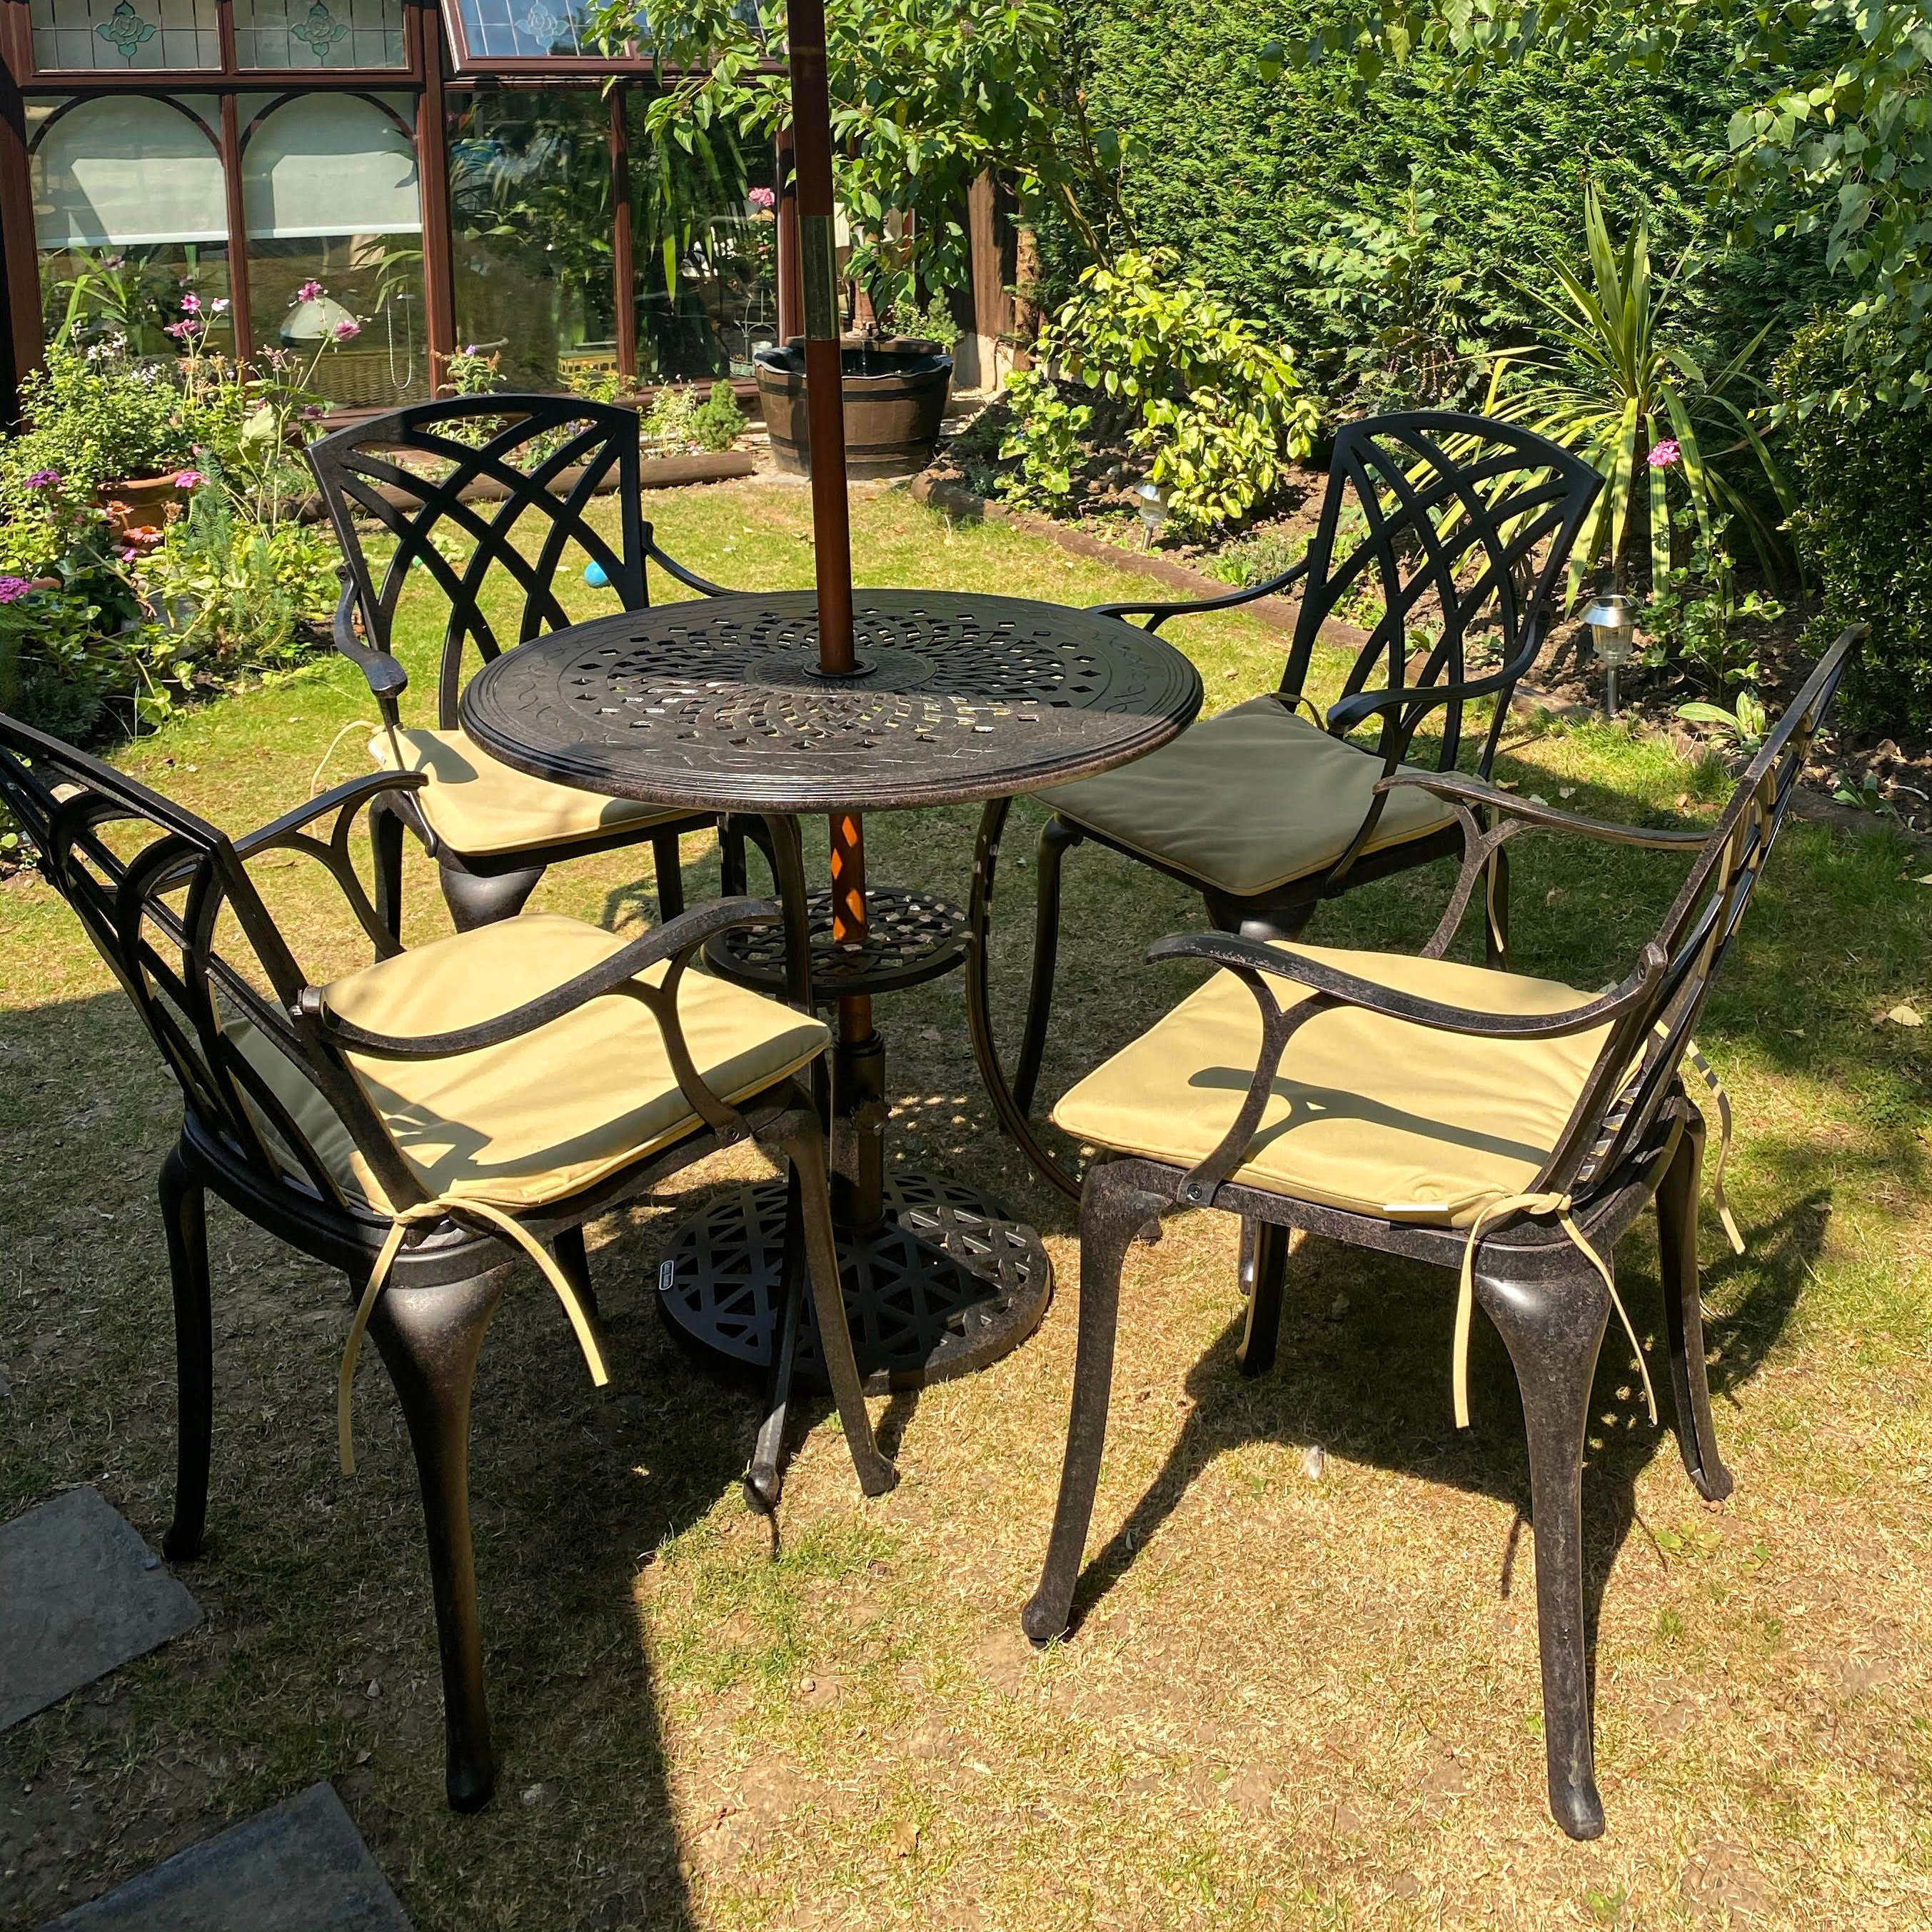 | Patio & - Anna Set Susan Chairs 4 Lazy Bronze Table Small